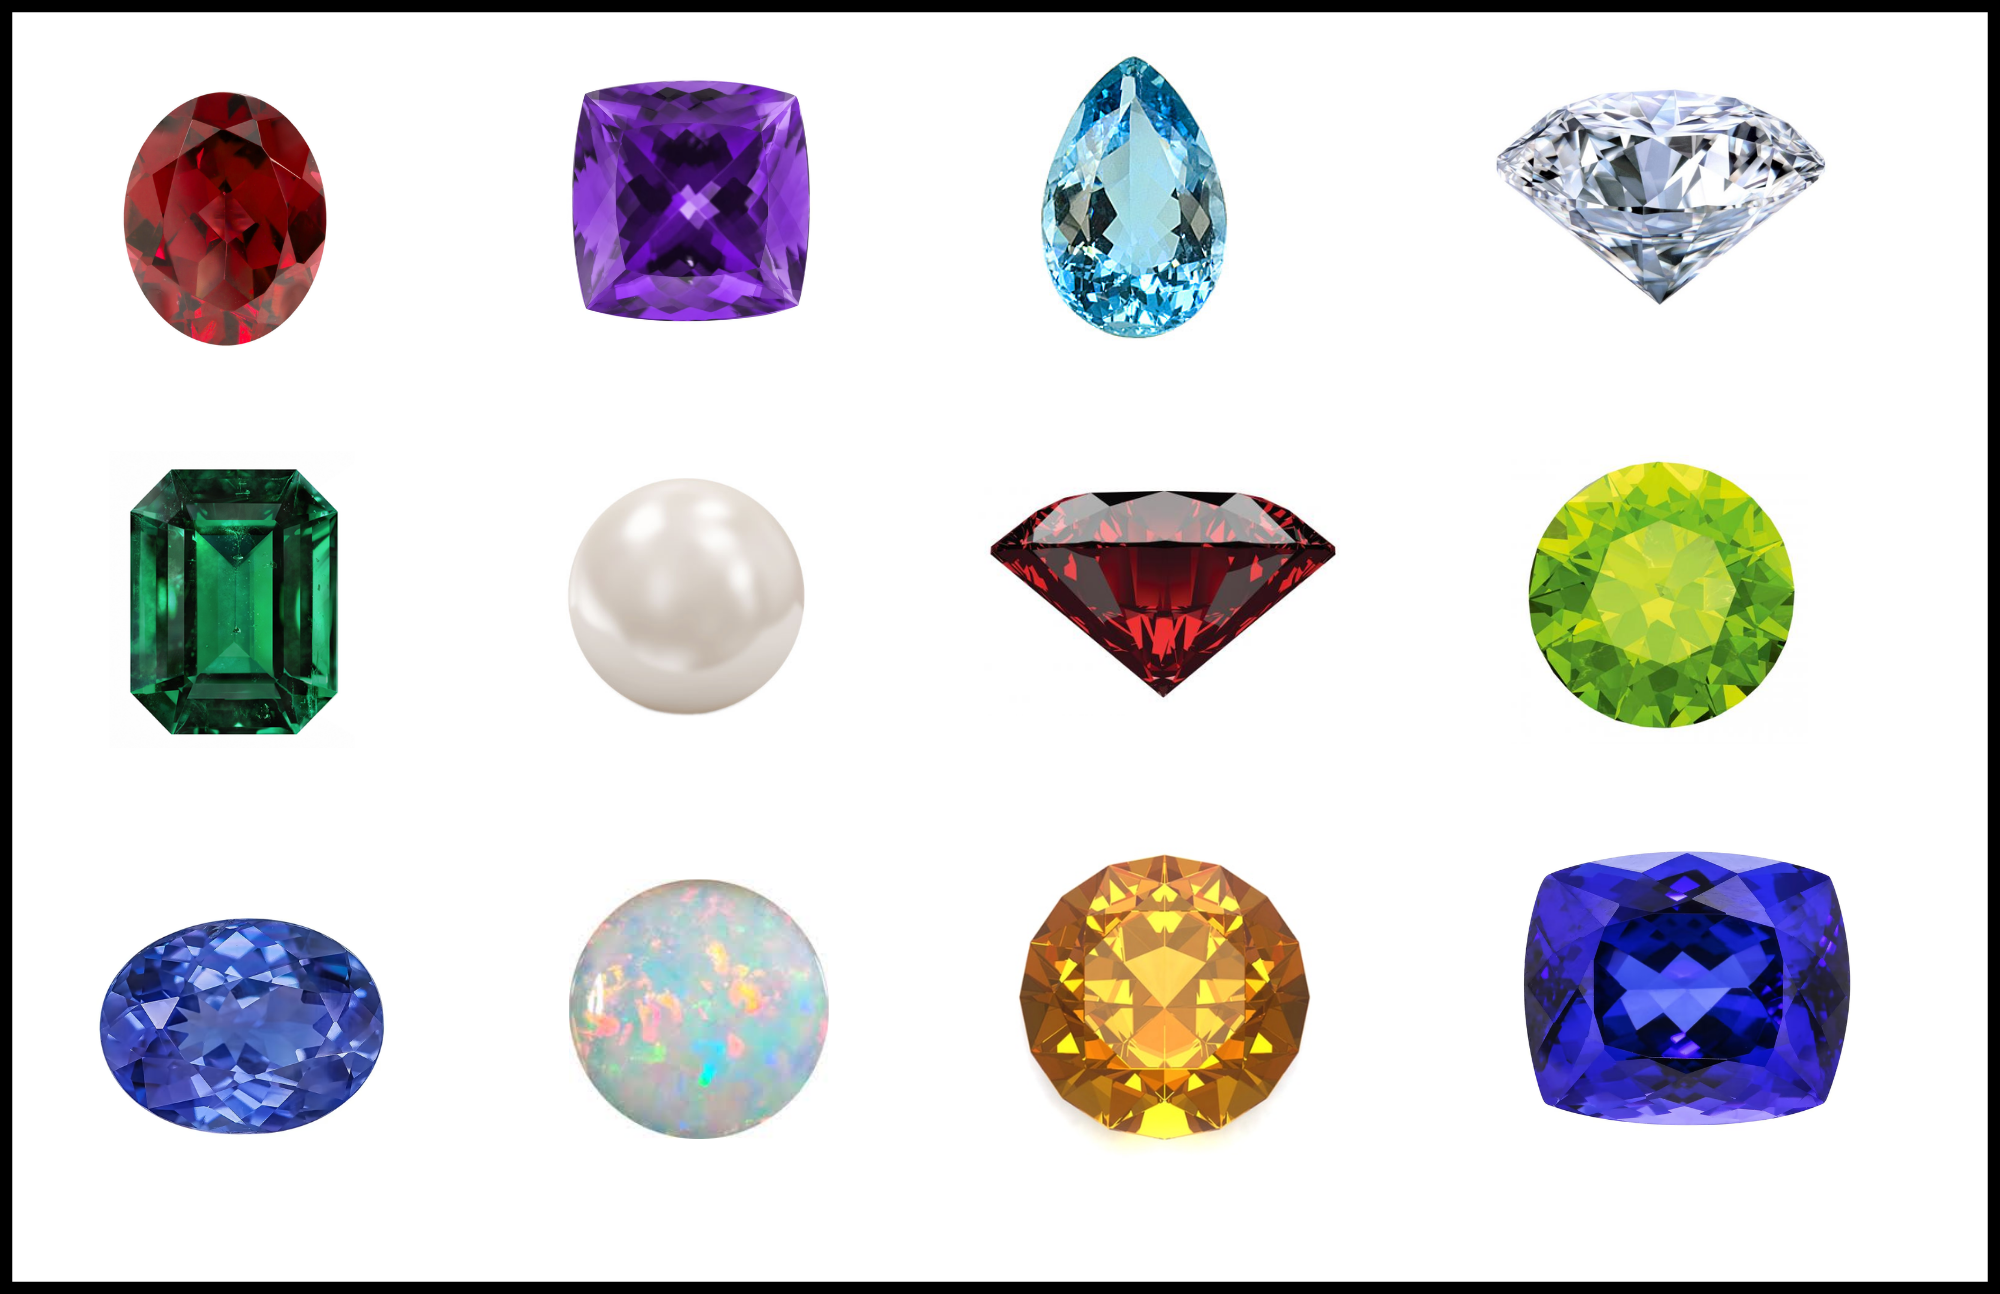 Birthstone Chart - Find Your Own Exceptional Birthstone Here